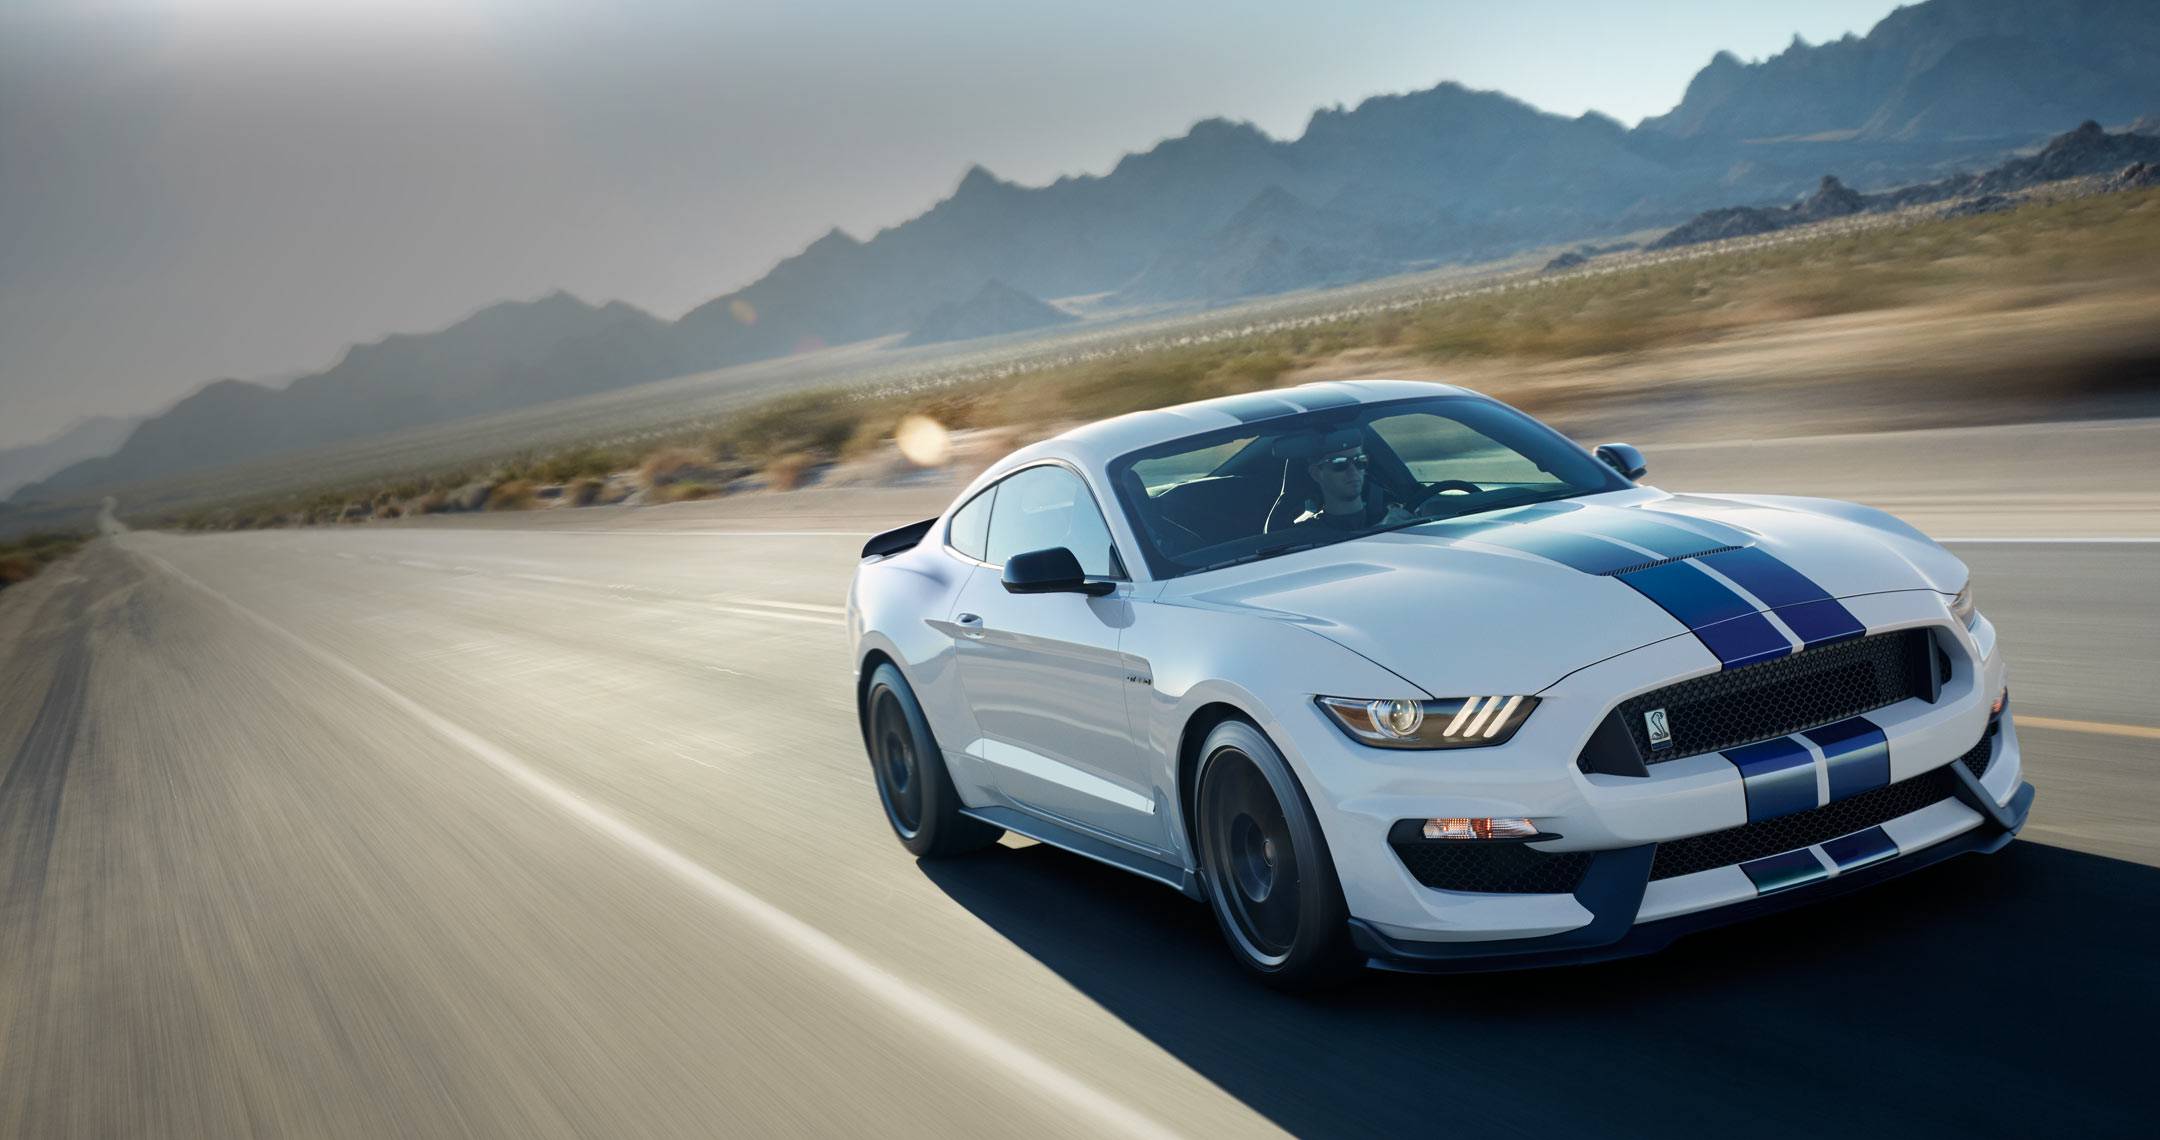 HQ Ford Mustang Shelby GT350 Wallpapers | File 168.8Kb